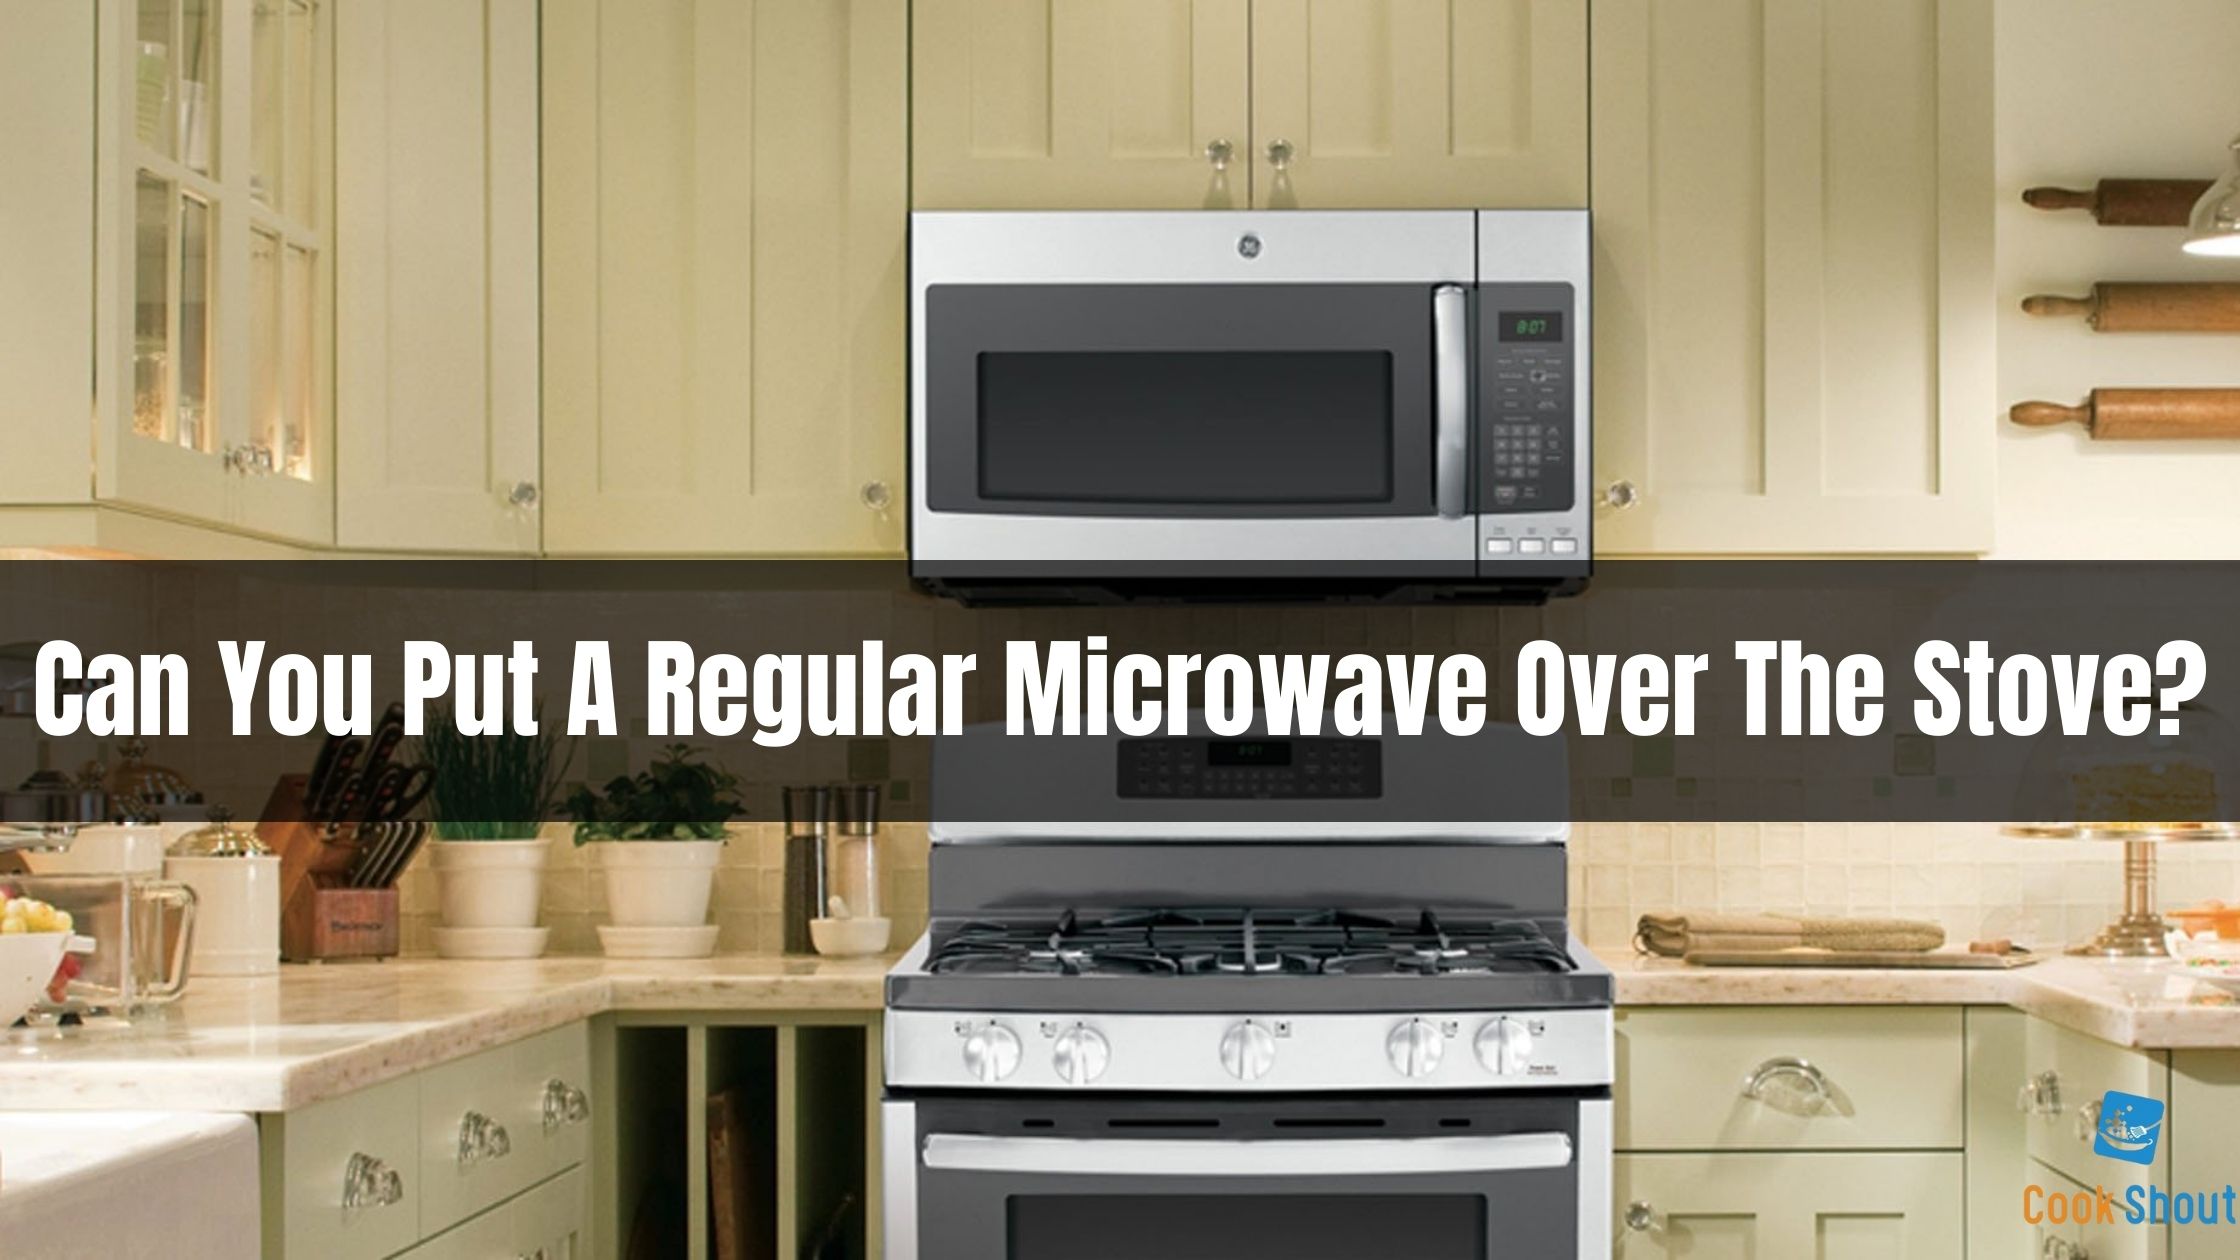 Can You Put A Regular Microwave Over The Stove